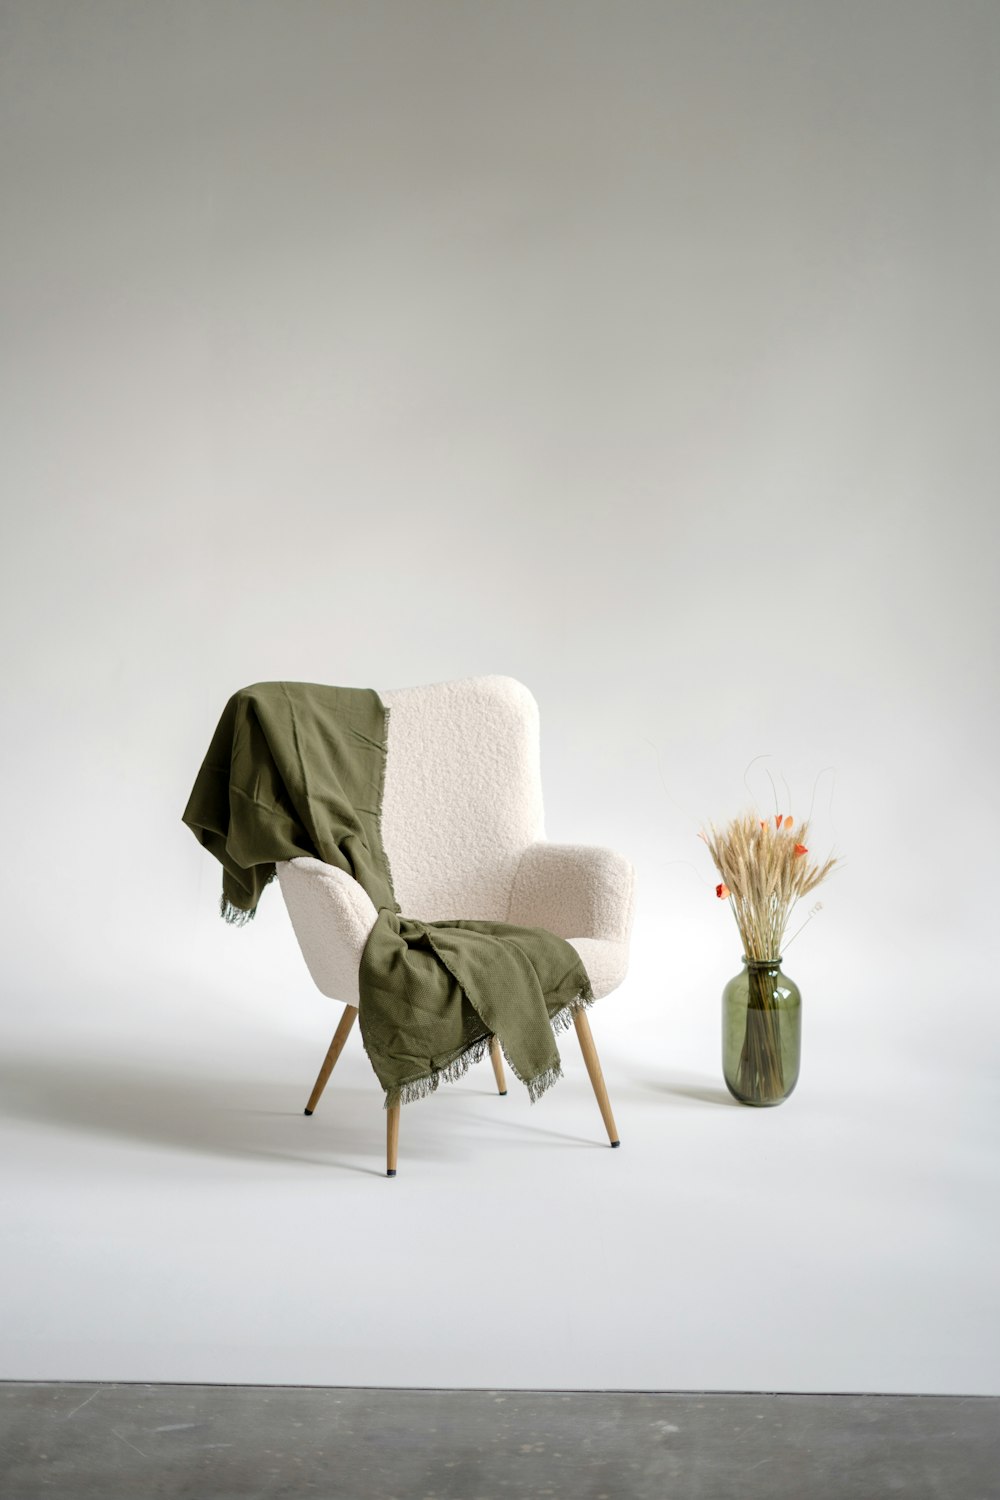 a chair with a blanket on it next to a vase with flowers